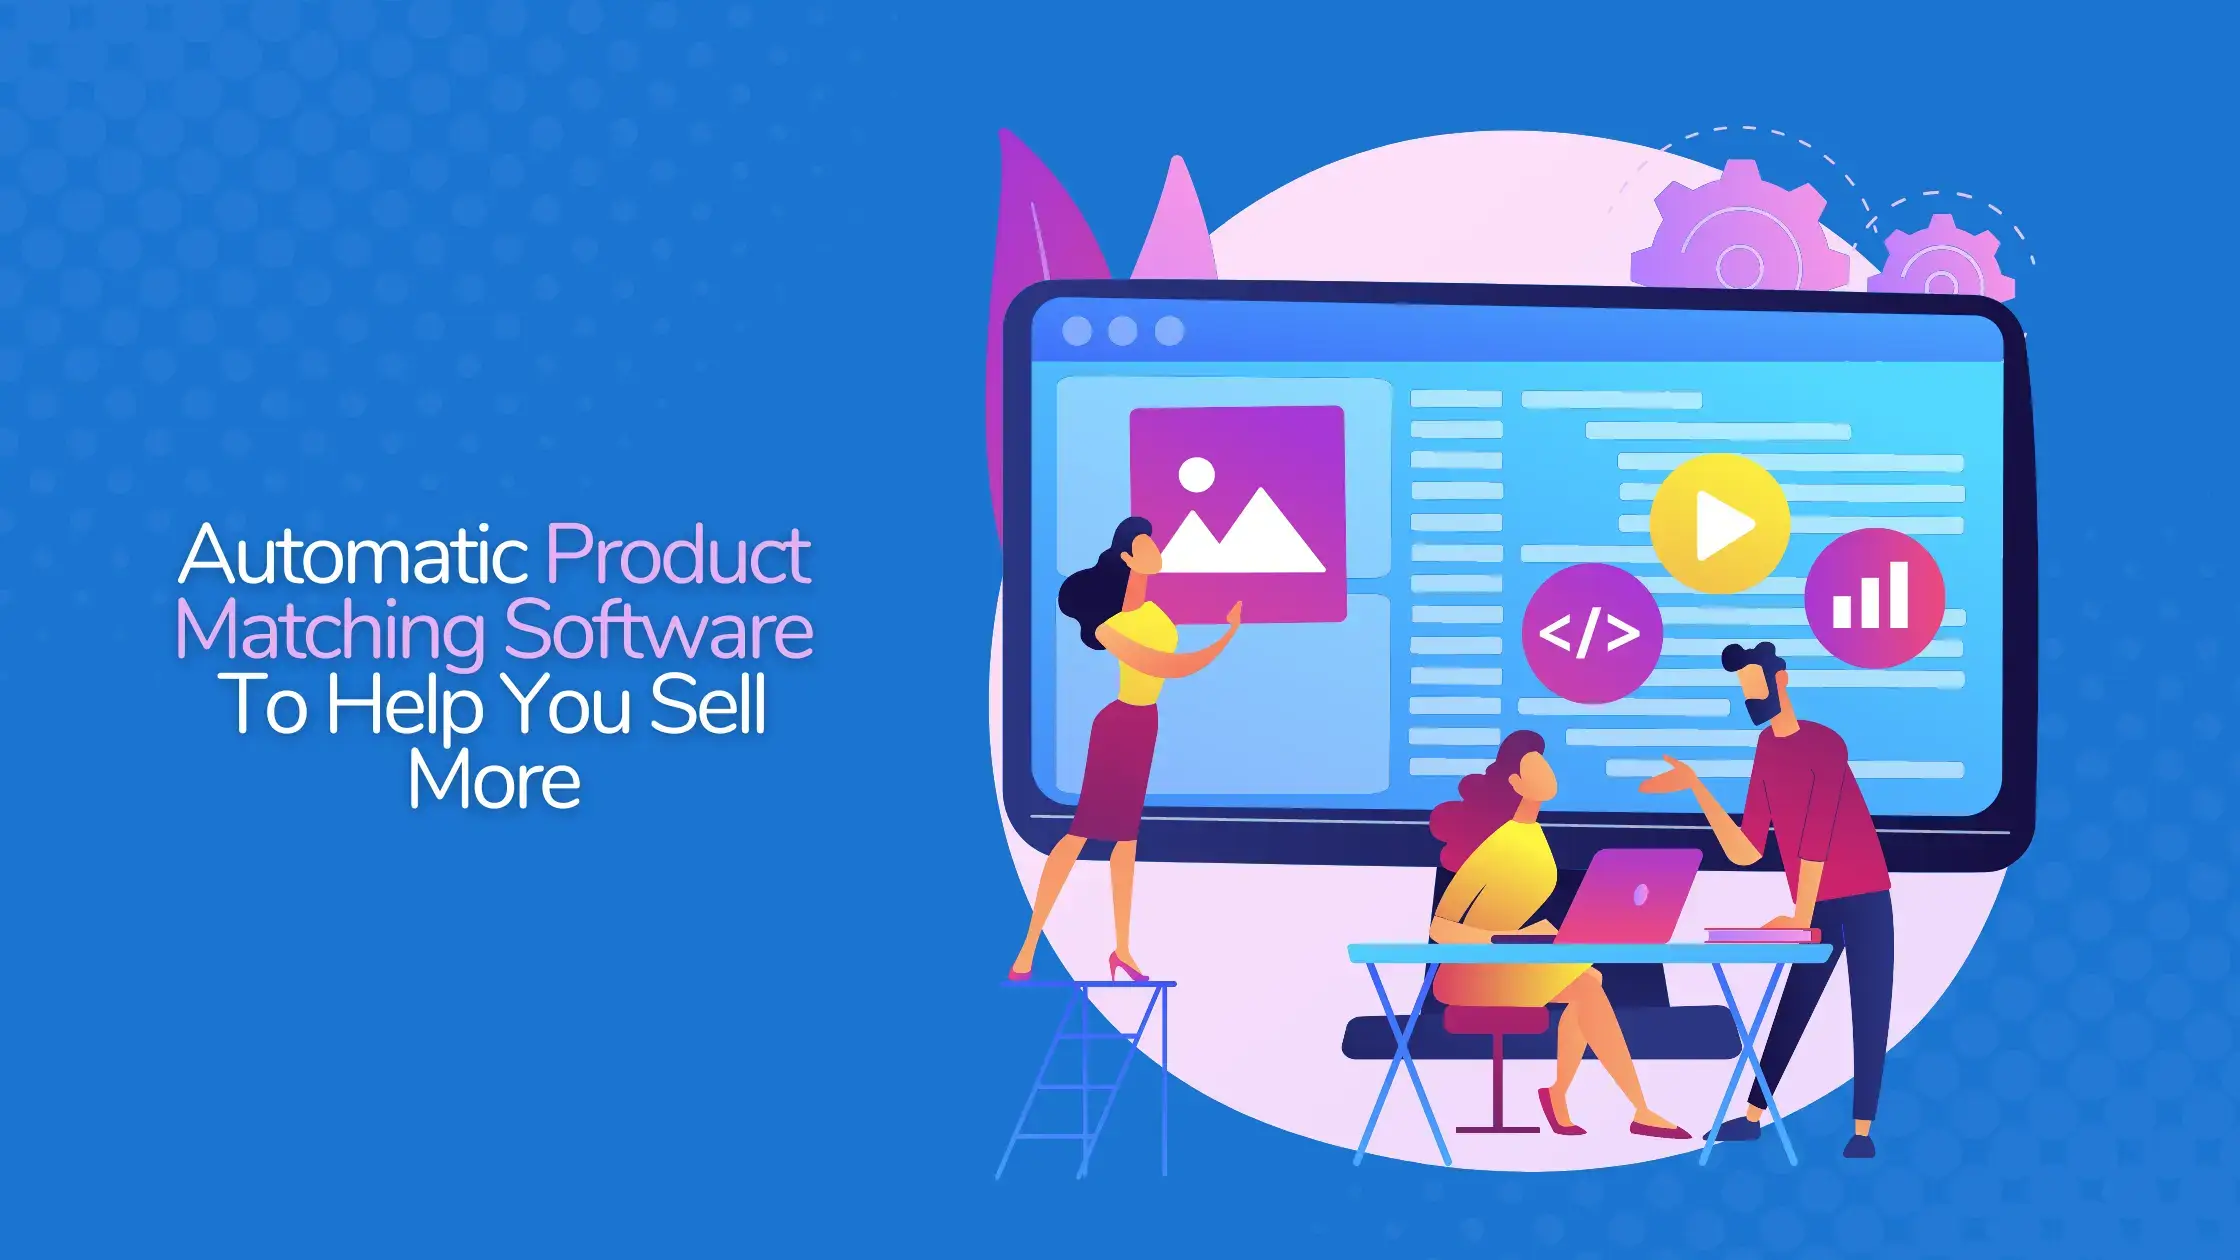 Automatic Product Matching Software To Help You Sell More 1 1